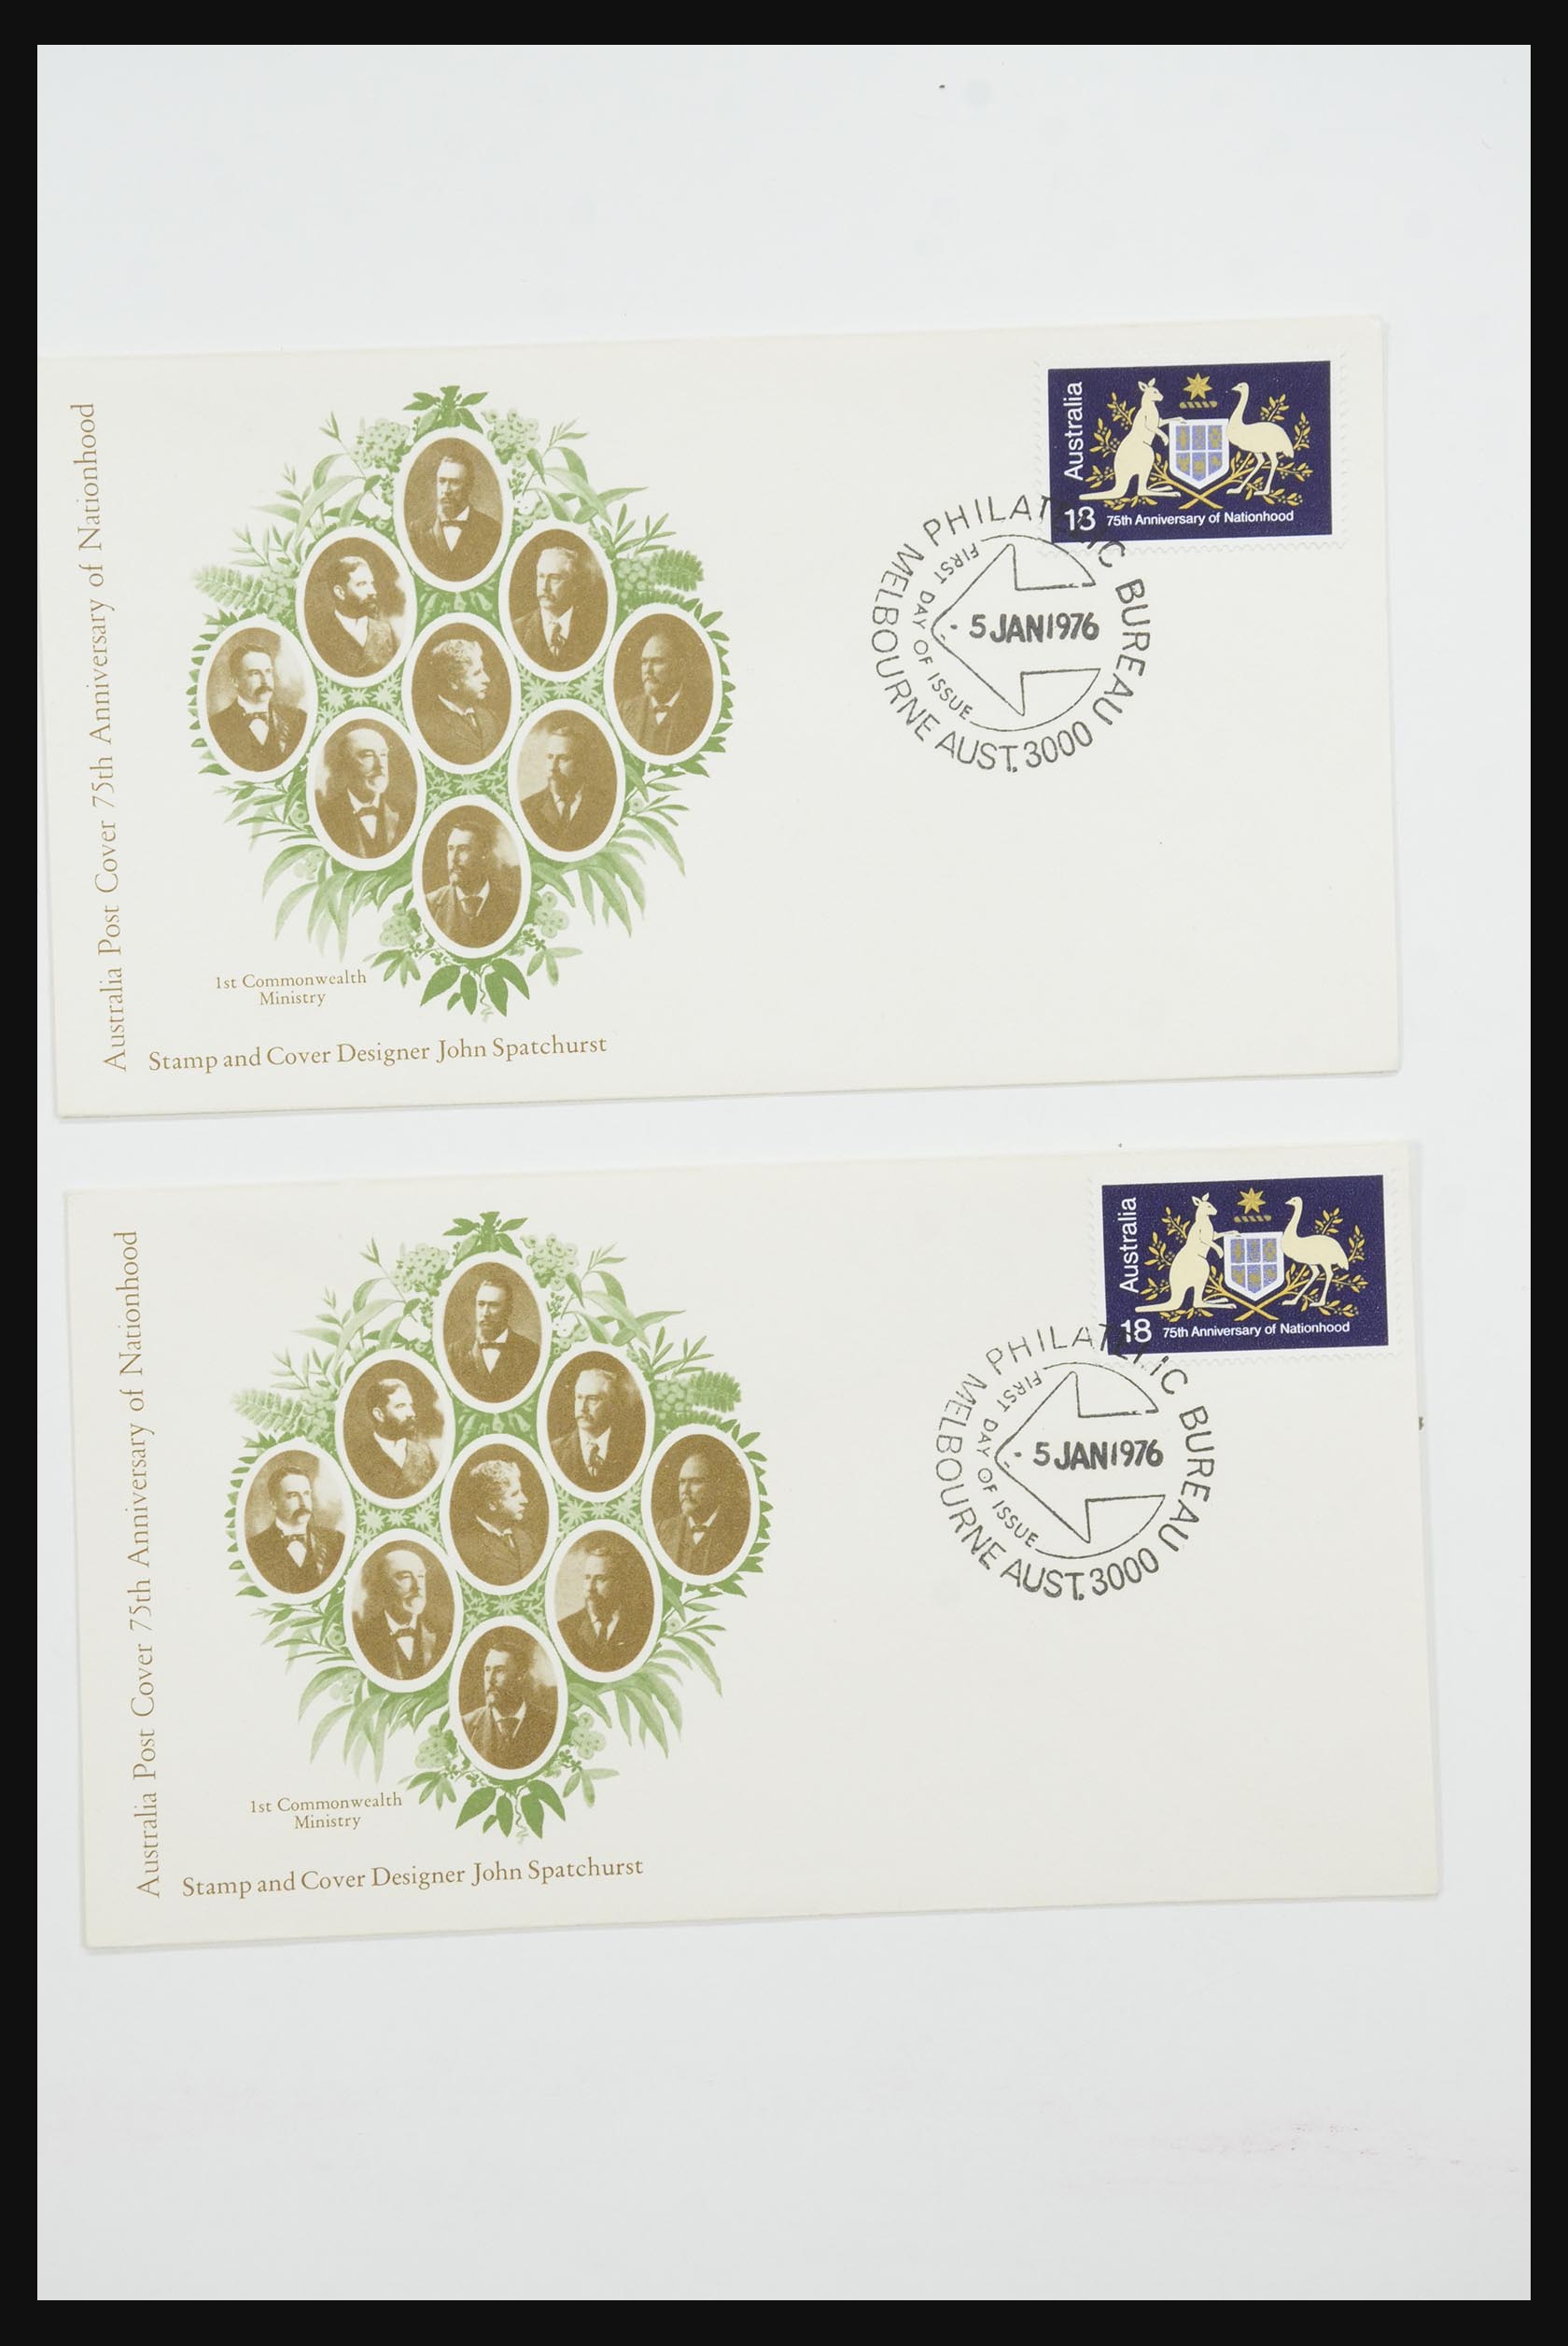 31726 087 - 31726 Great Britain and colonies covers and FDC's 1937-2001.